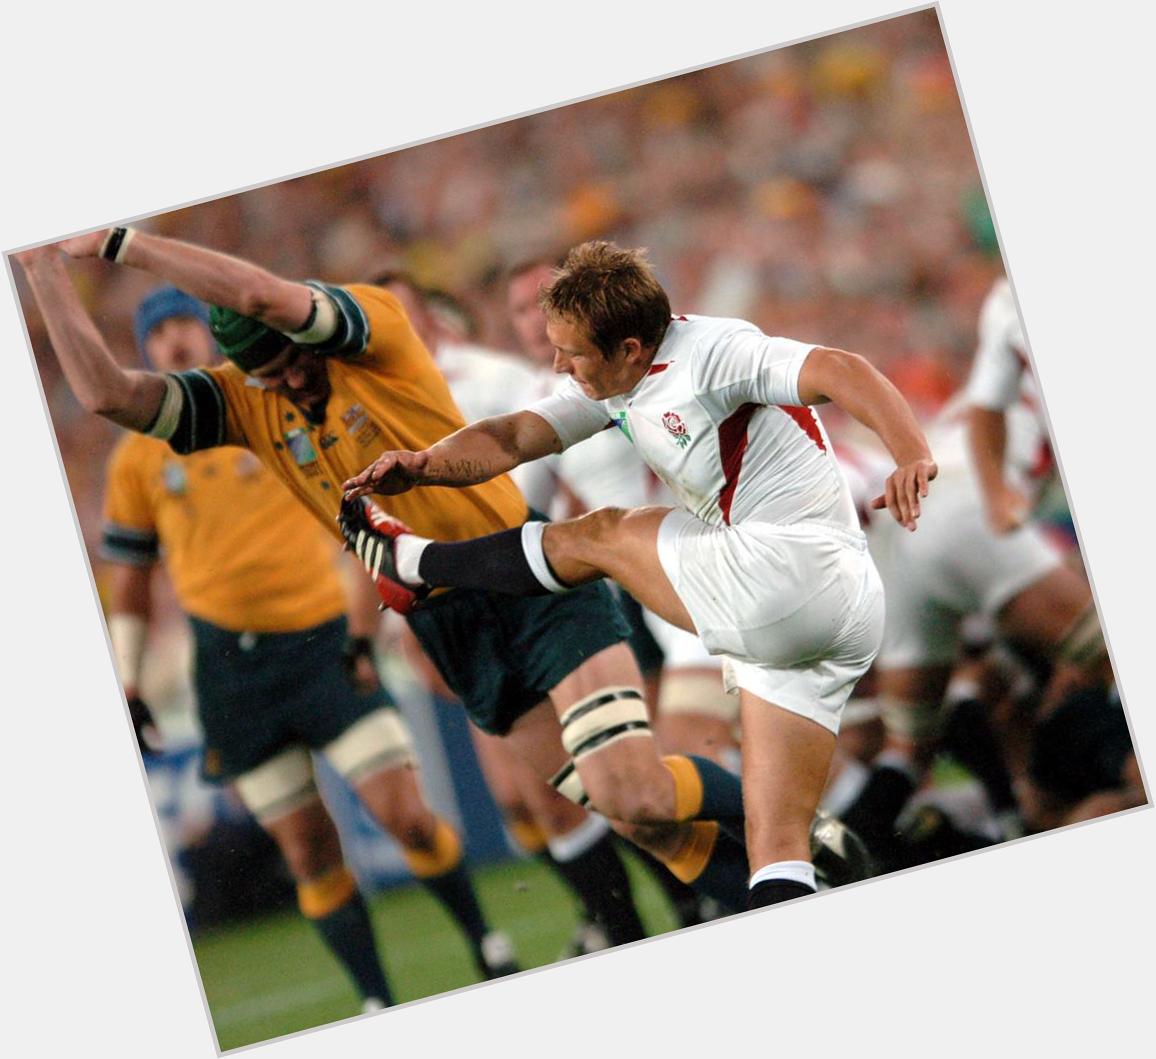 Jonny Wilkinson holds the Rugby World Cup points record 277, scored points in two RWC finals. Happy birthday Jonny 